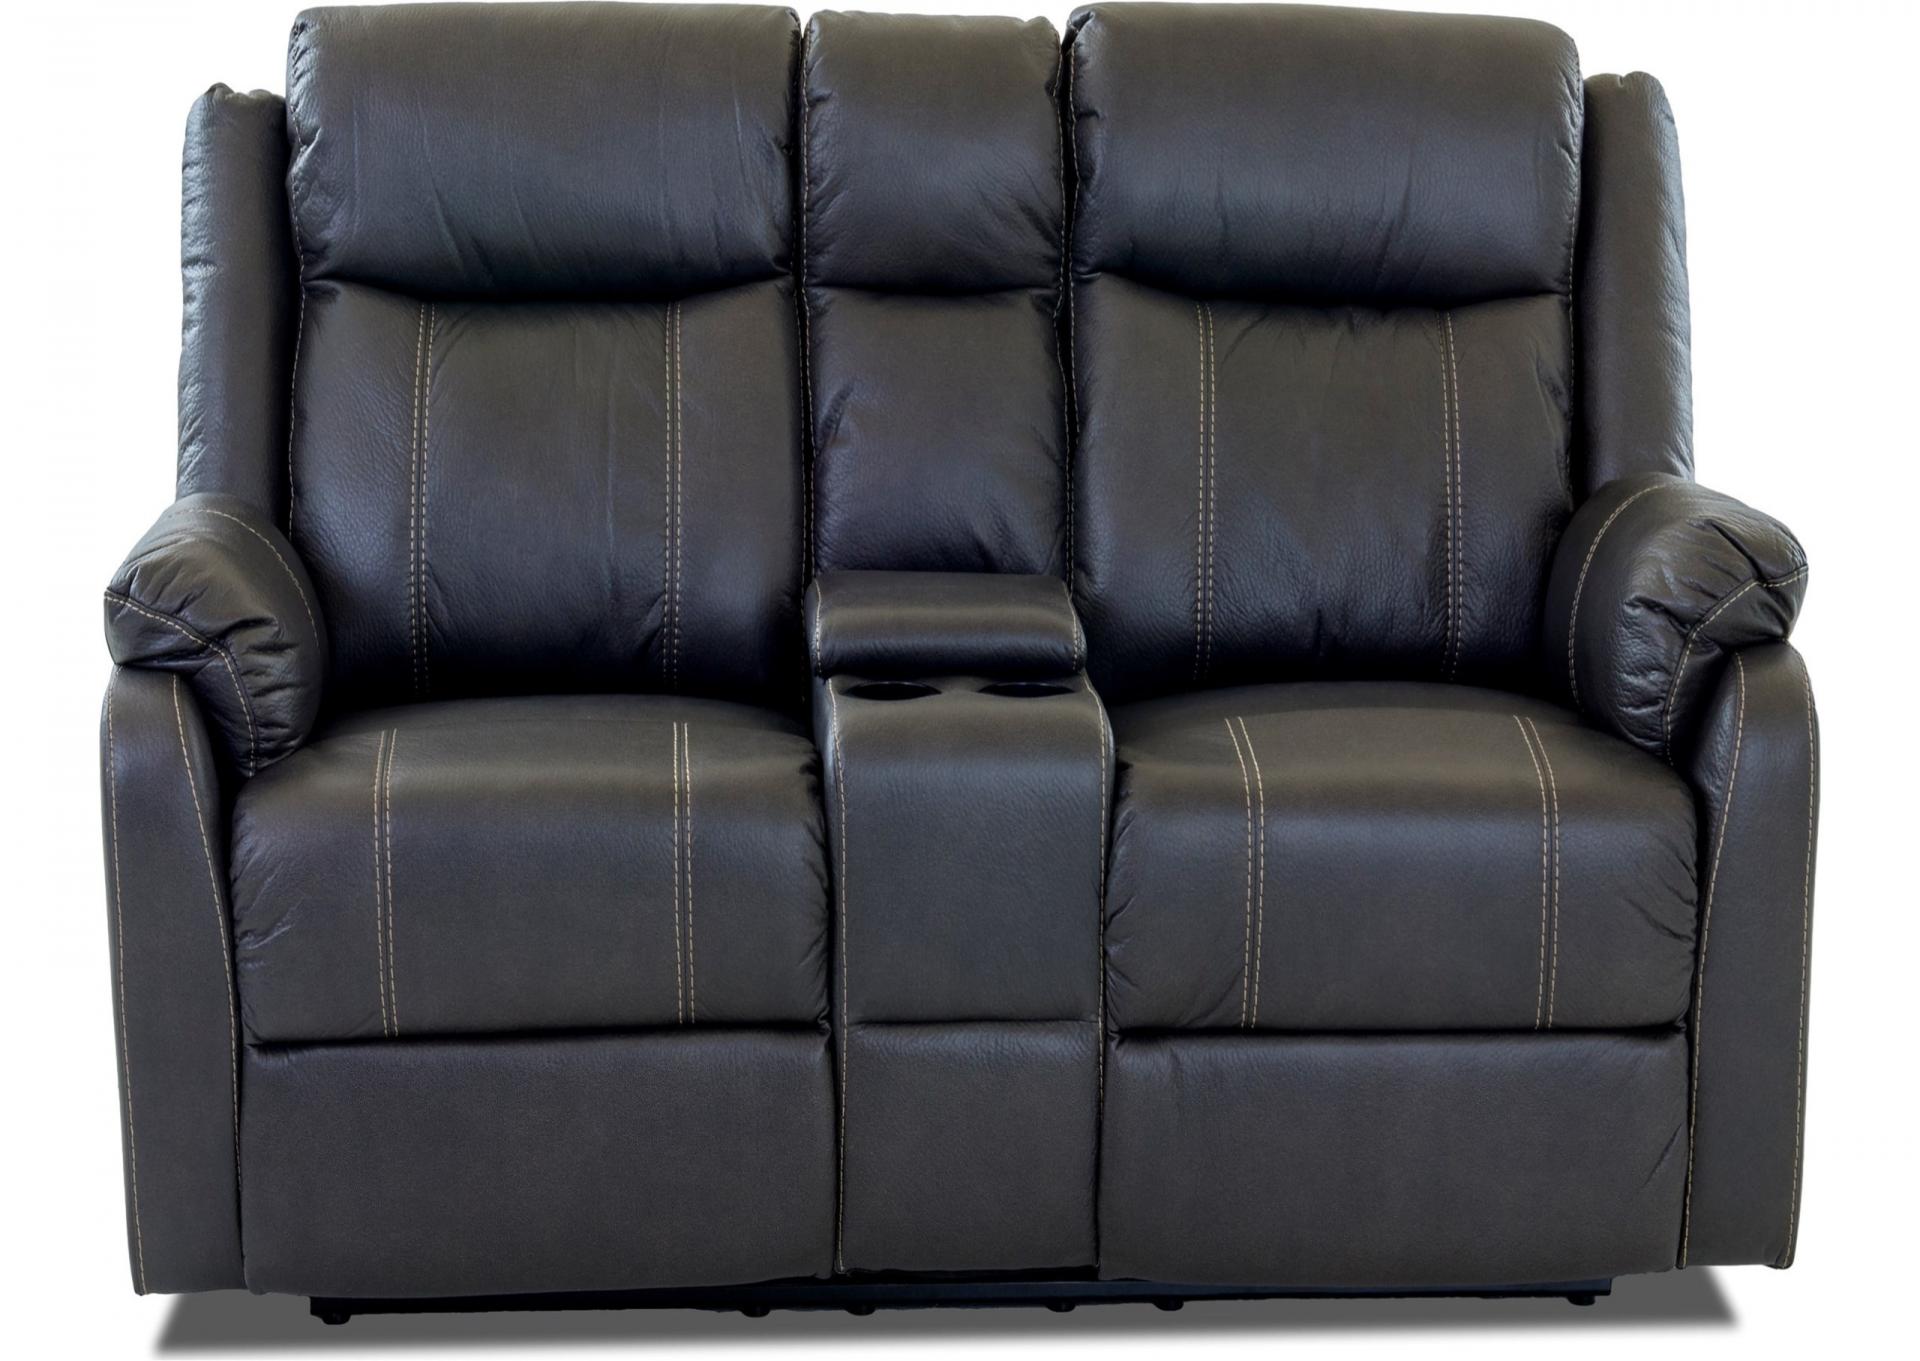 Domino Gray Dual Reclining Sofa with drop down tray and Dual reclining Loveseat